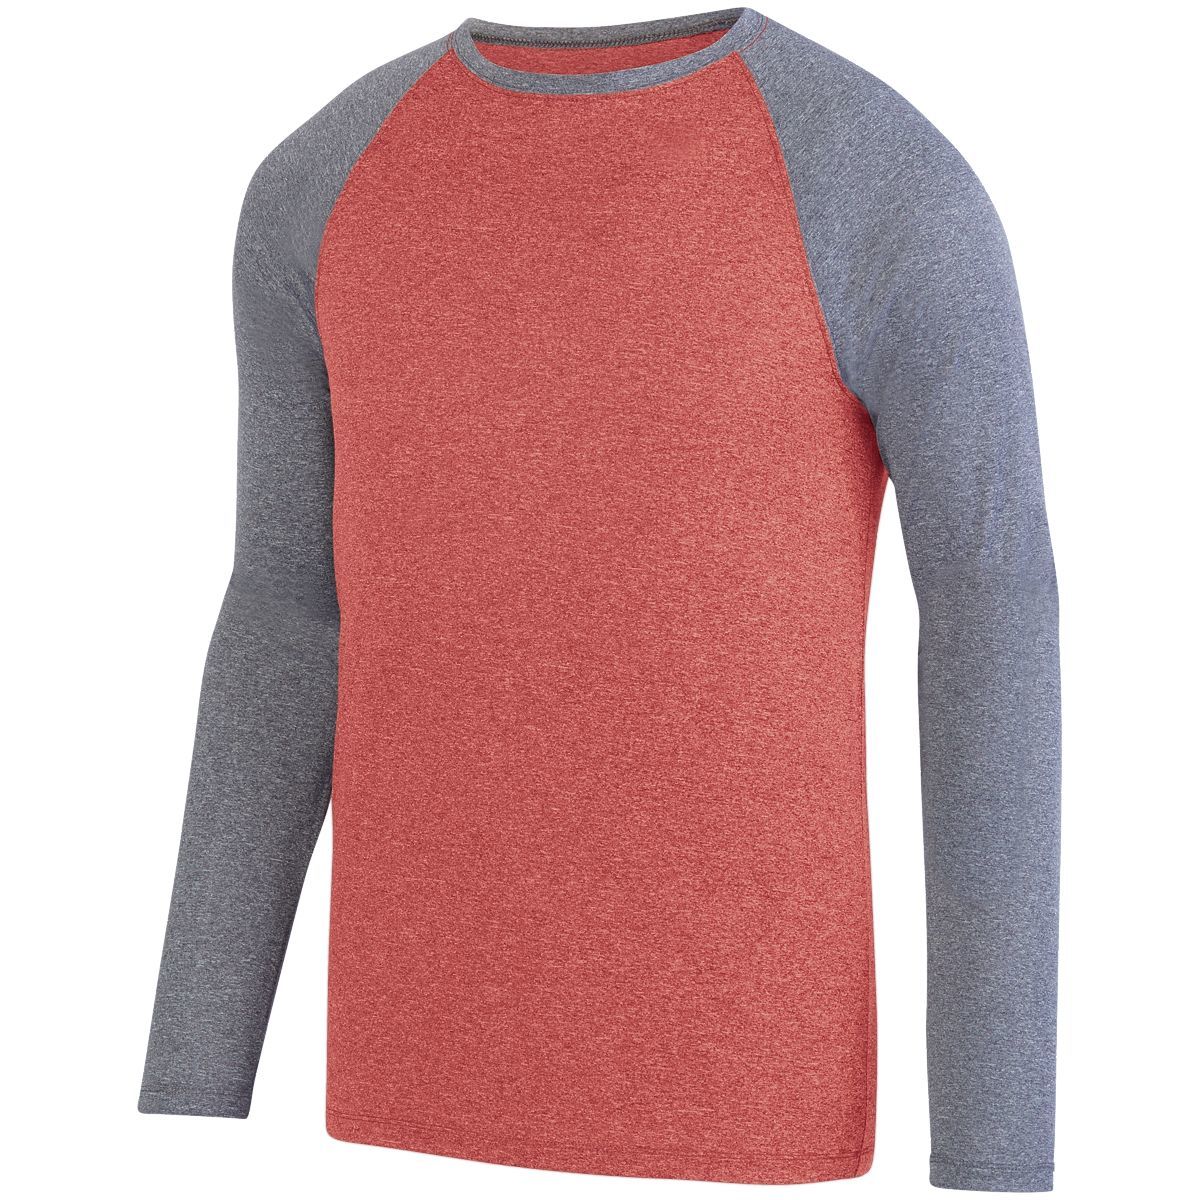 Augusta Sportswear Kinergy Two Color Long Sleeve Raglan Tee in Red Heather/Graphite Heather  -Part of the Adult, Adult-Tee-Shirt, T-Shirts, Augusta-Products, Shirts product lines at KanaleyCreations.com